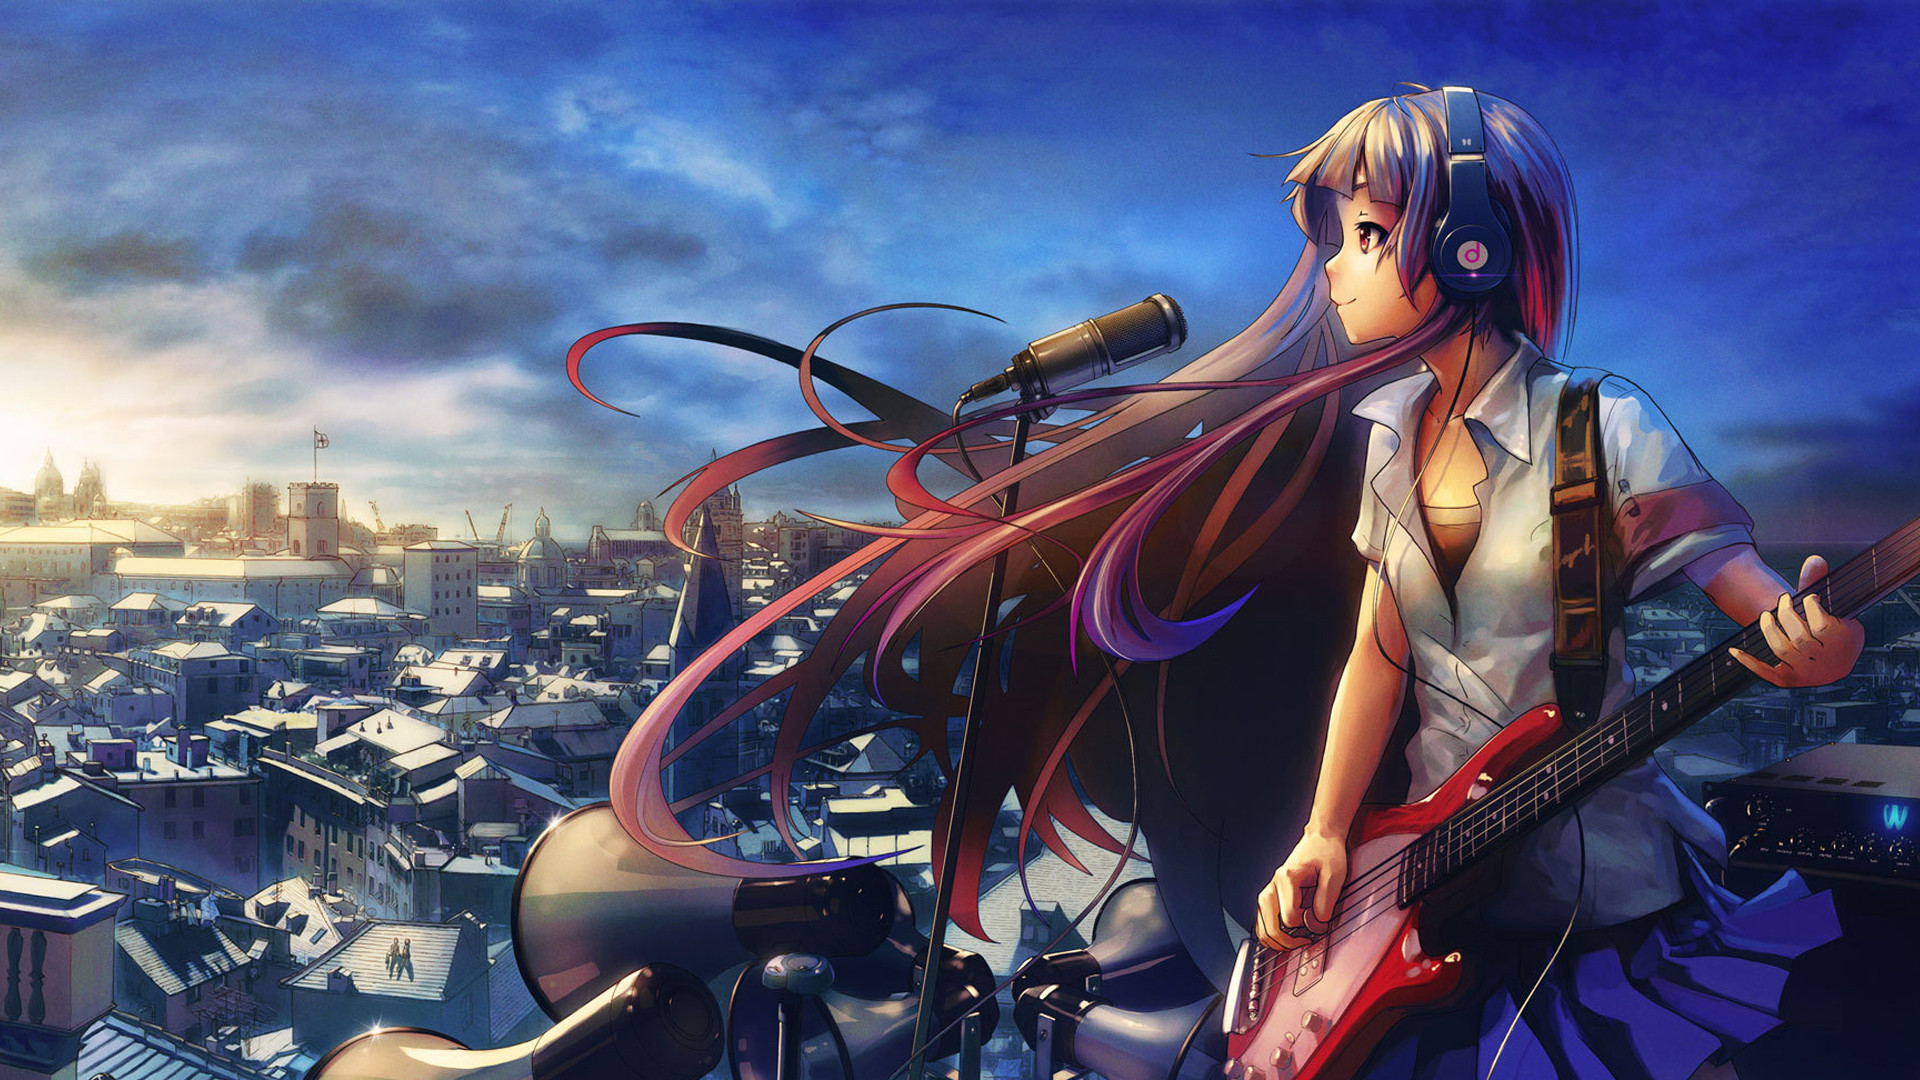 1920x1080 Anime Girl with guitar, Full HD wallpaper, 1080p | Full HD Wallpapers .